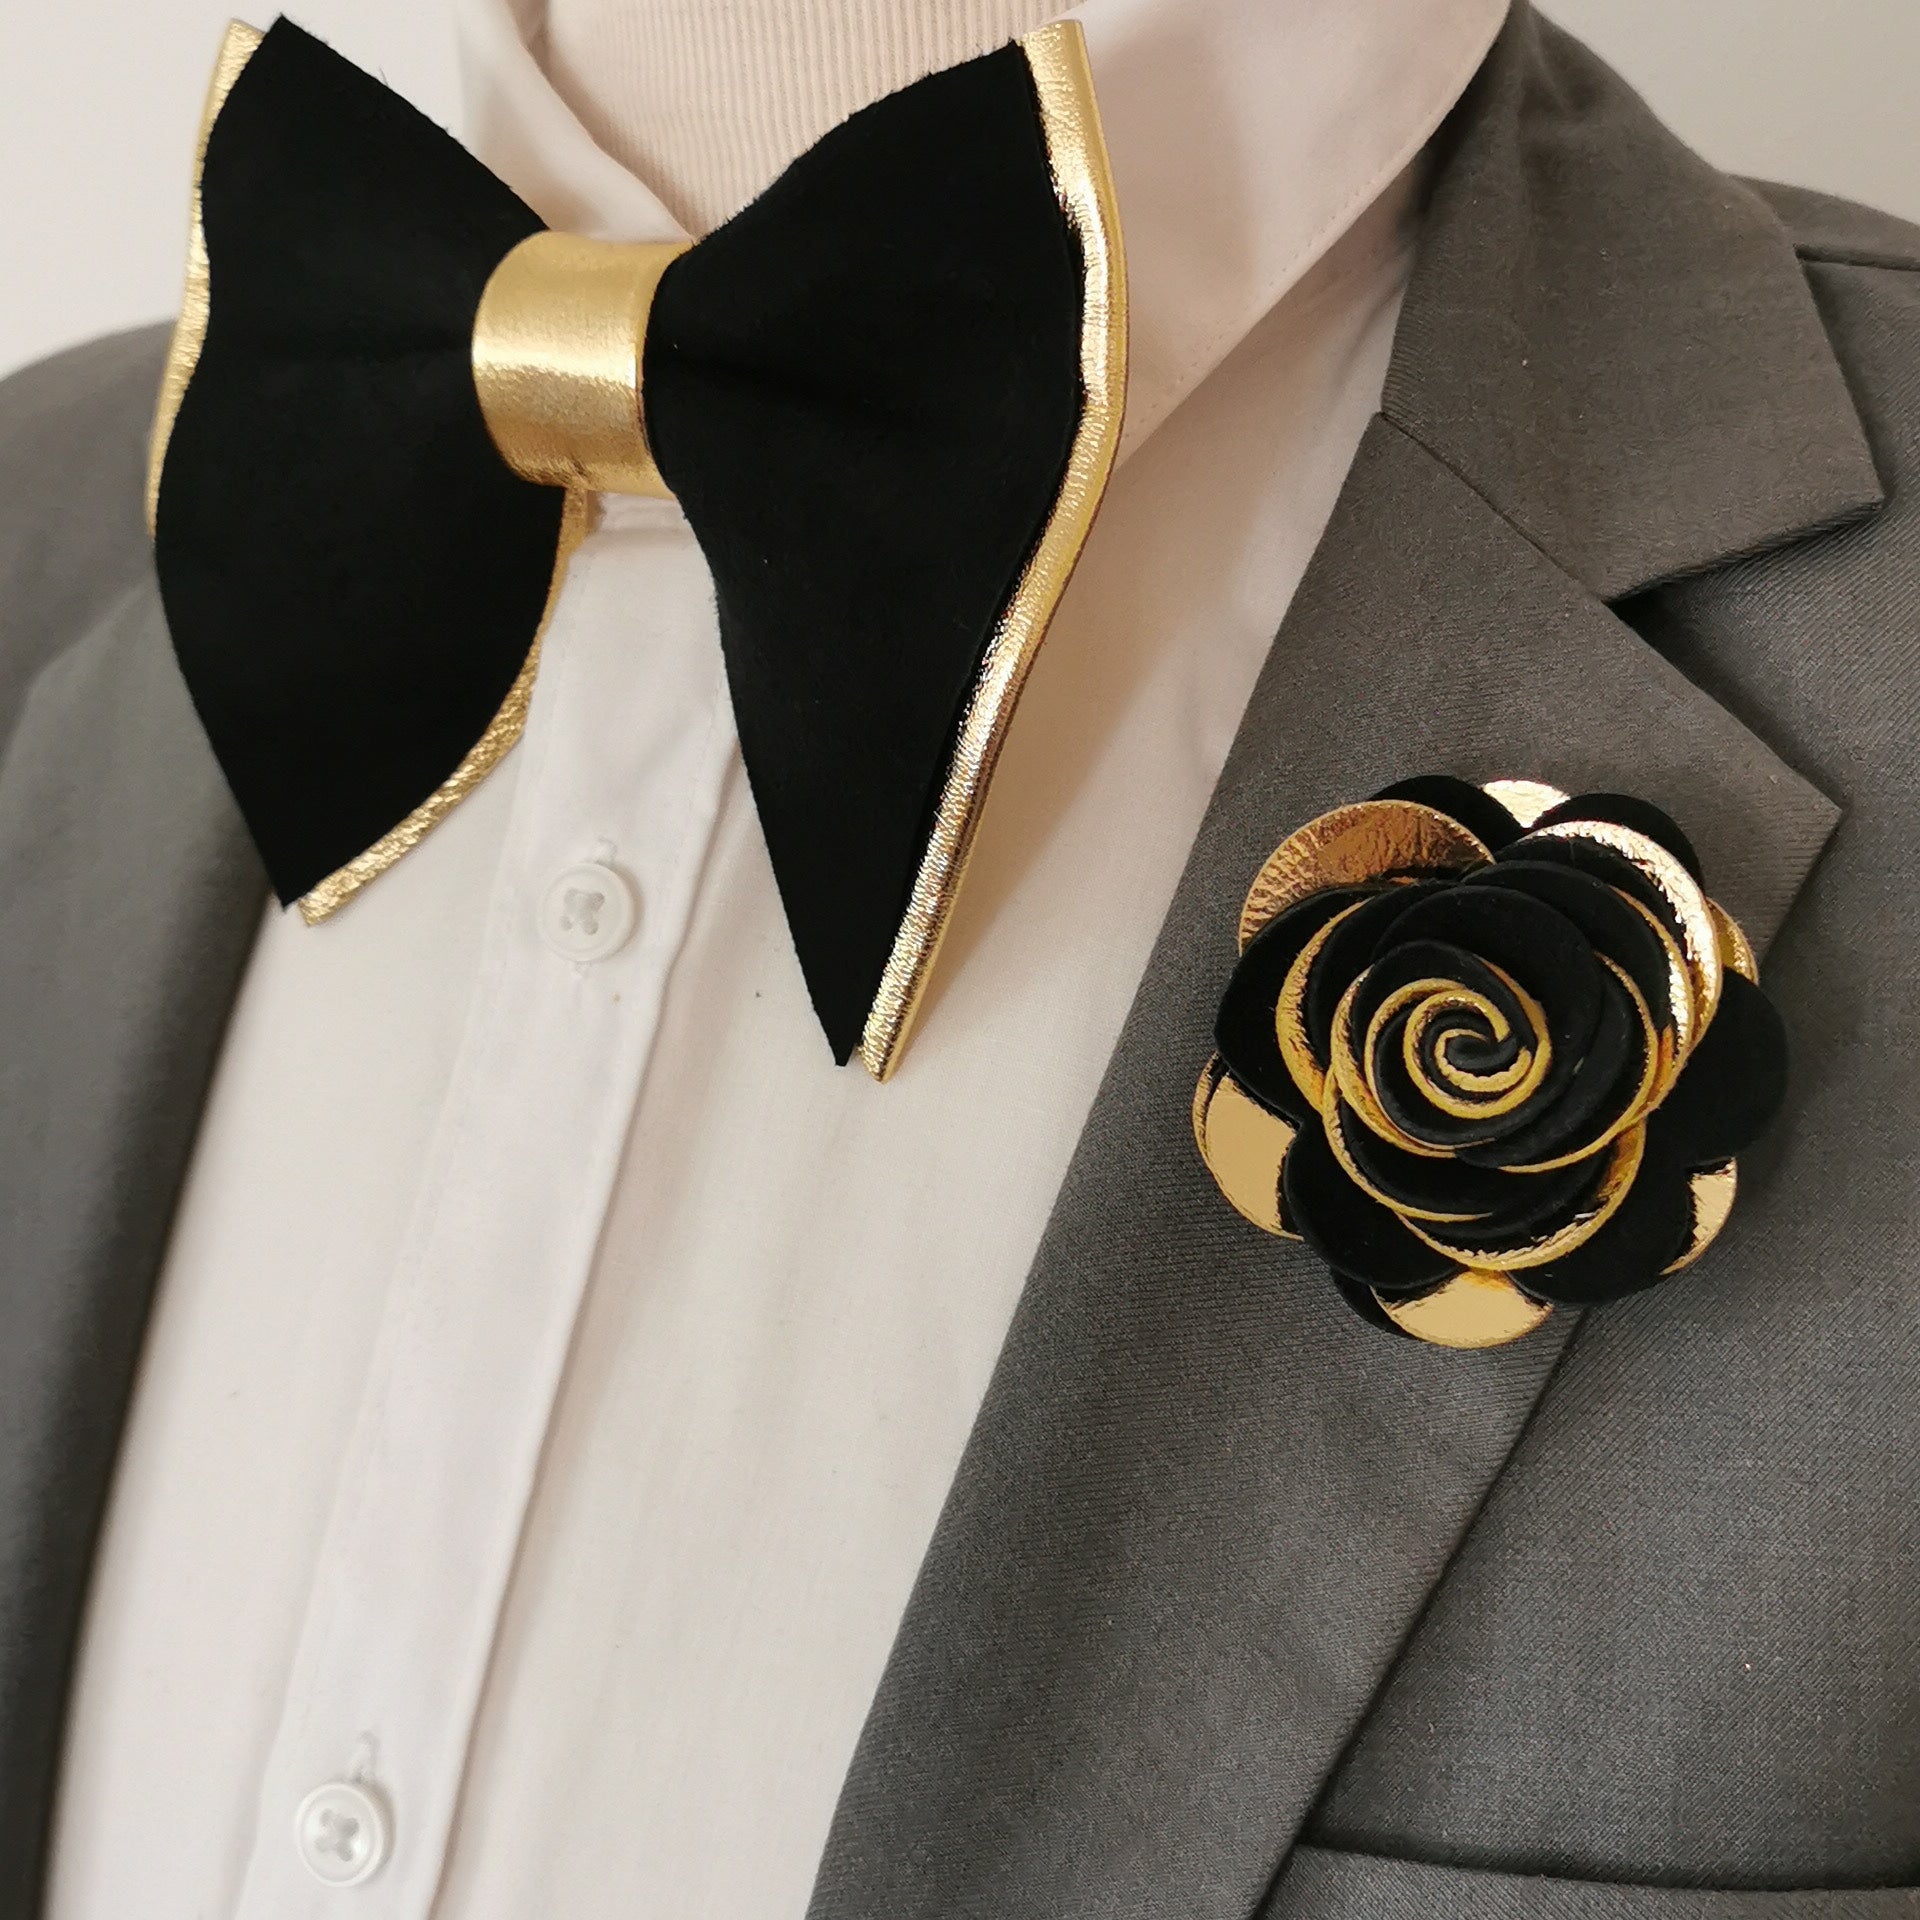 Black and Gold Mens Bow Tie Lapel Flower Gift Set Bow Tie Square and Pin Set